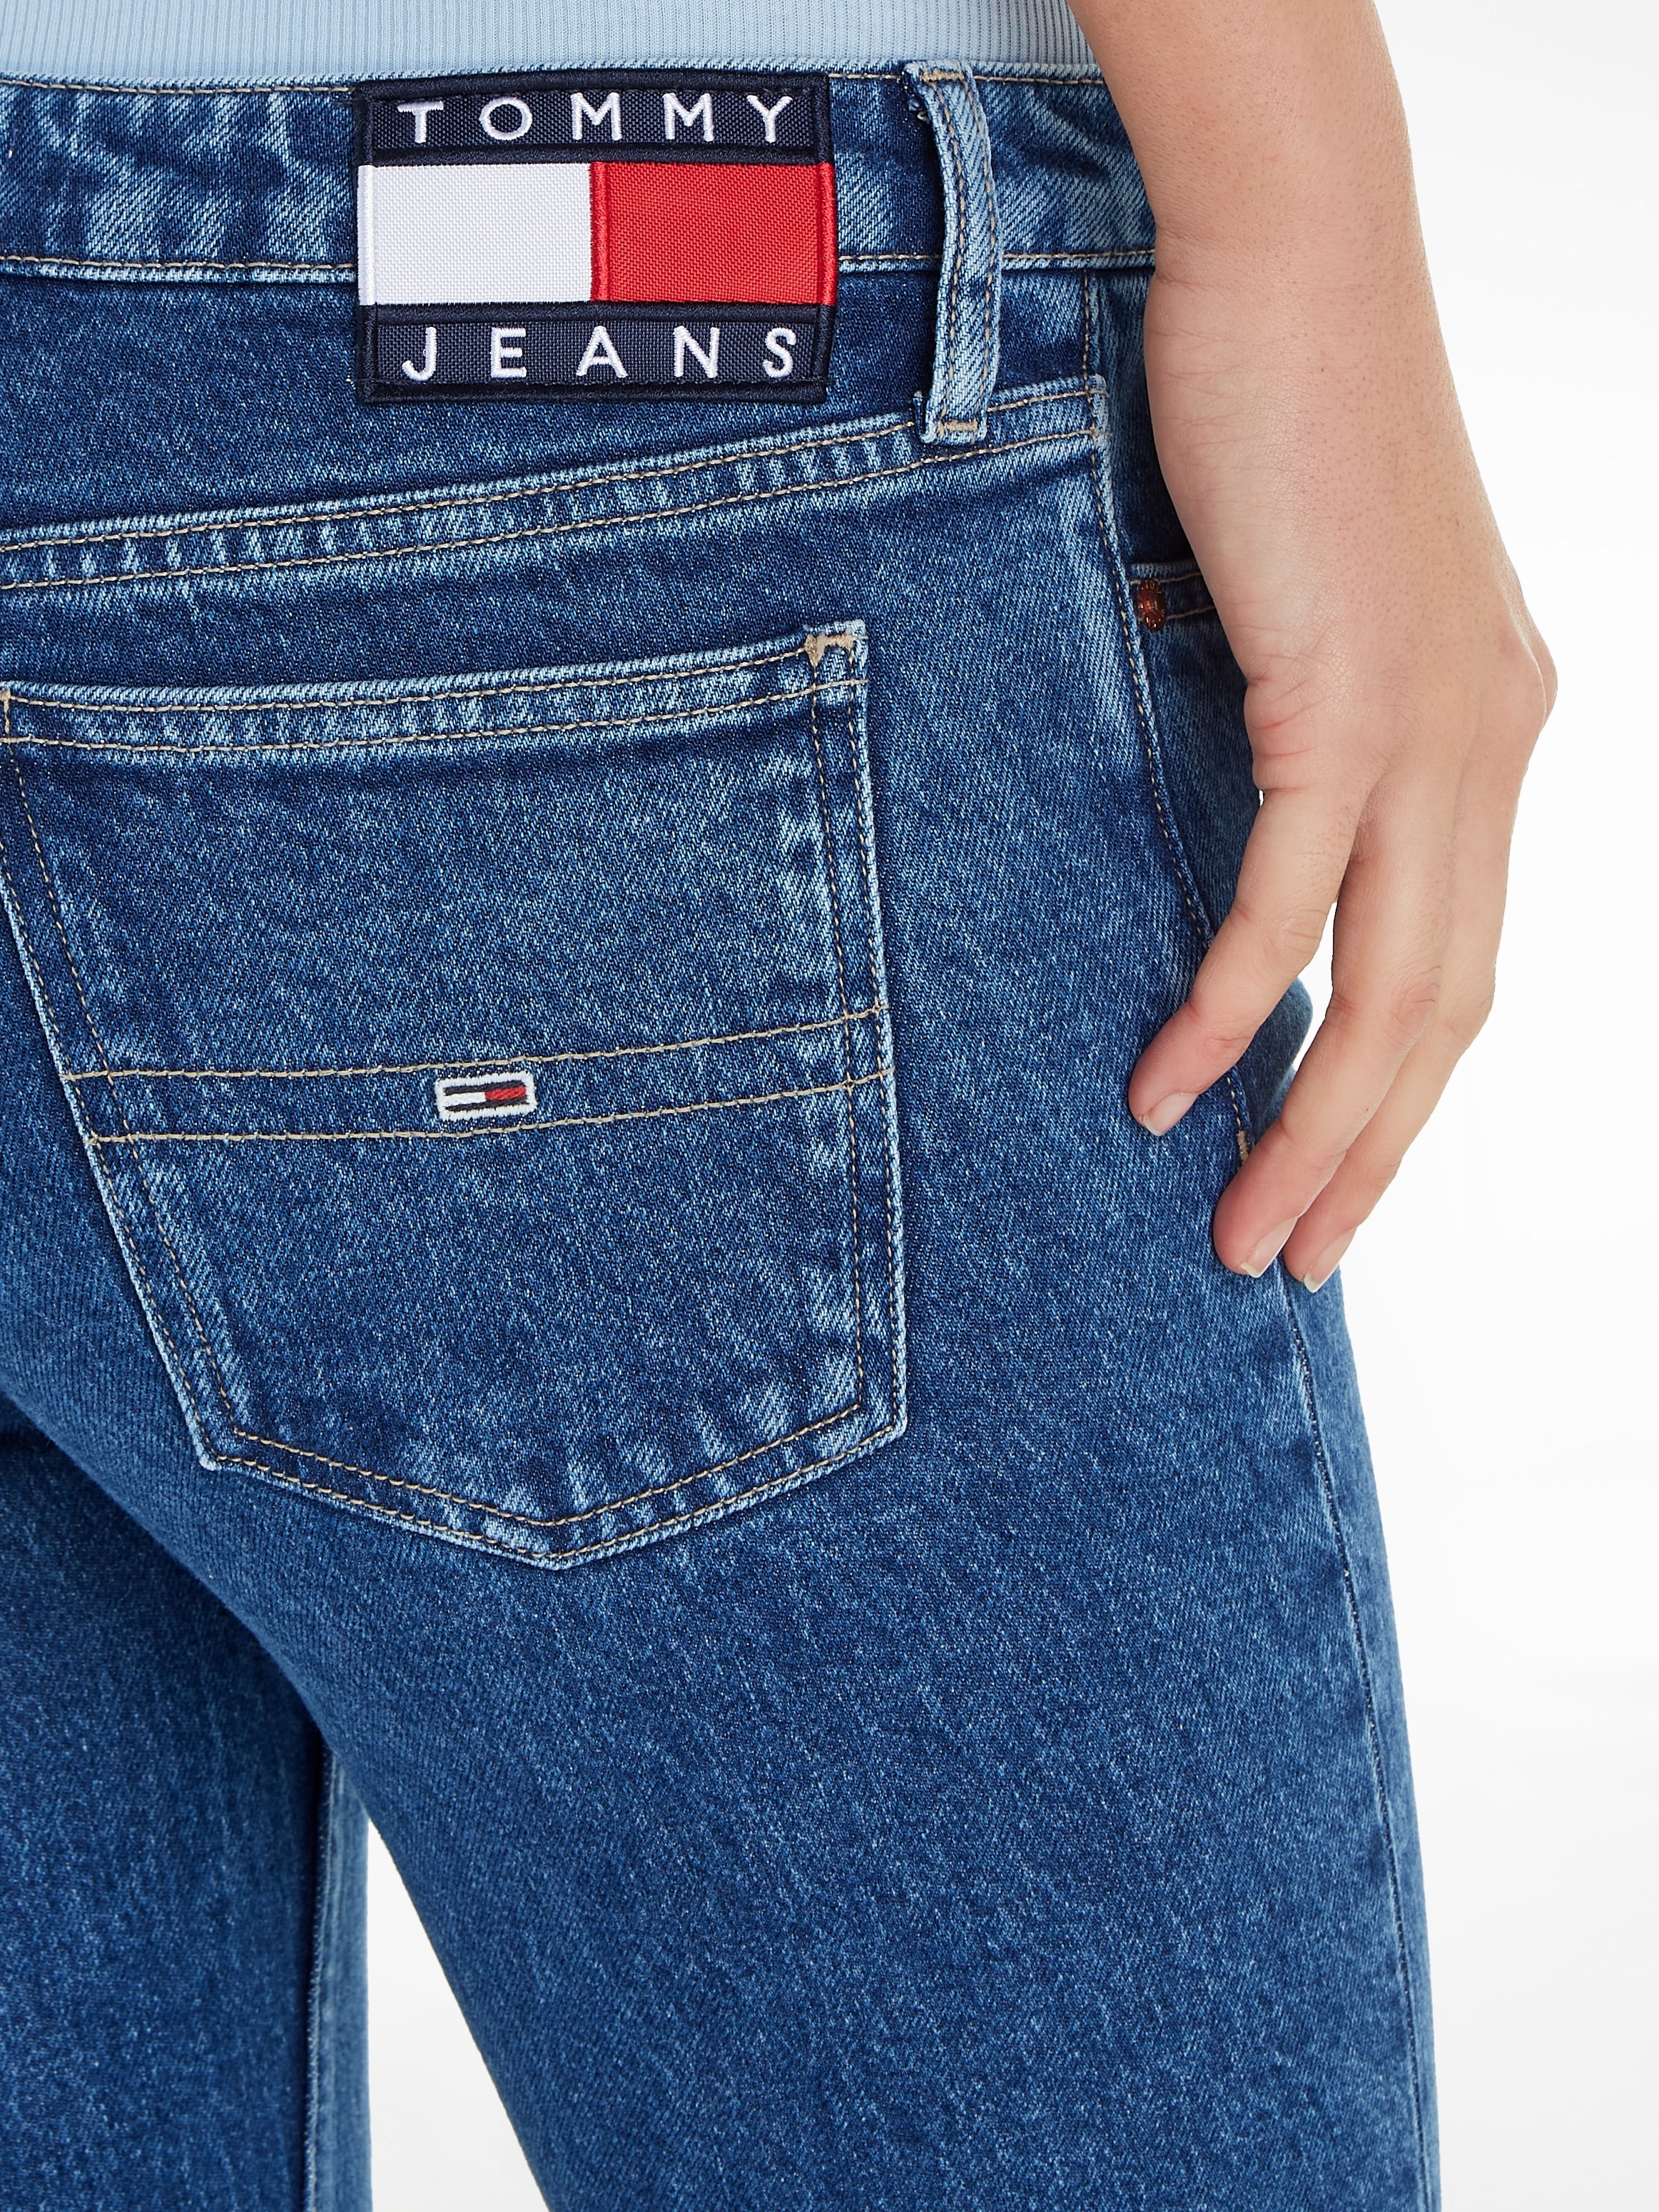 Jeans Tommy mit bei ♕ Jeans Schlagjeans, Tommy Logobadge